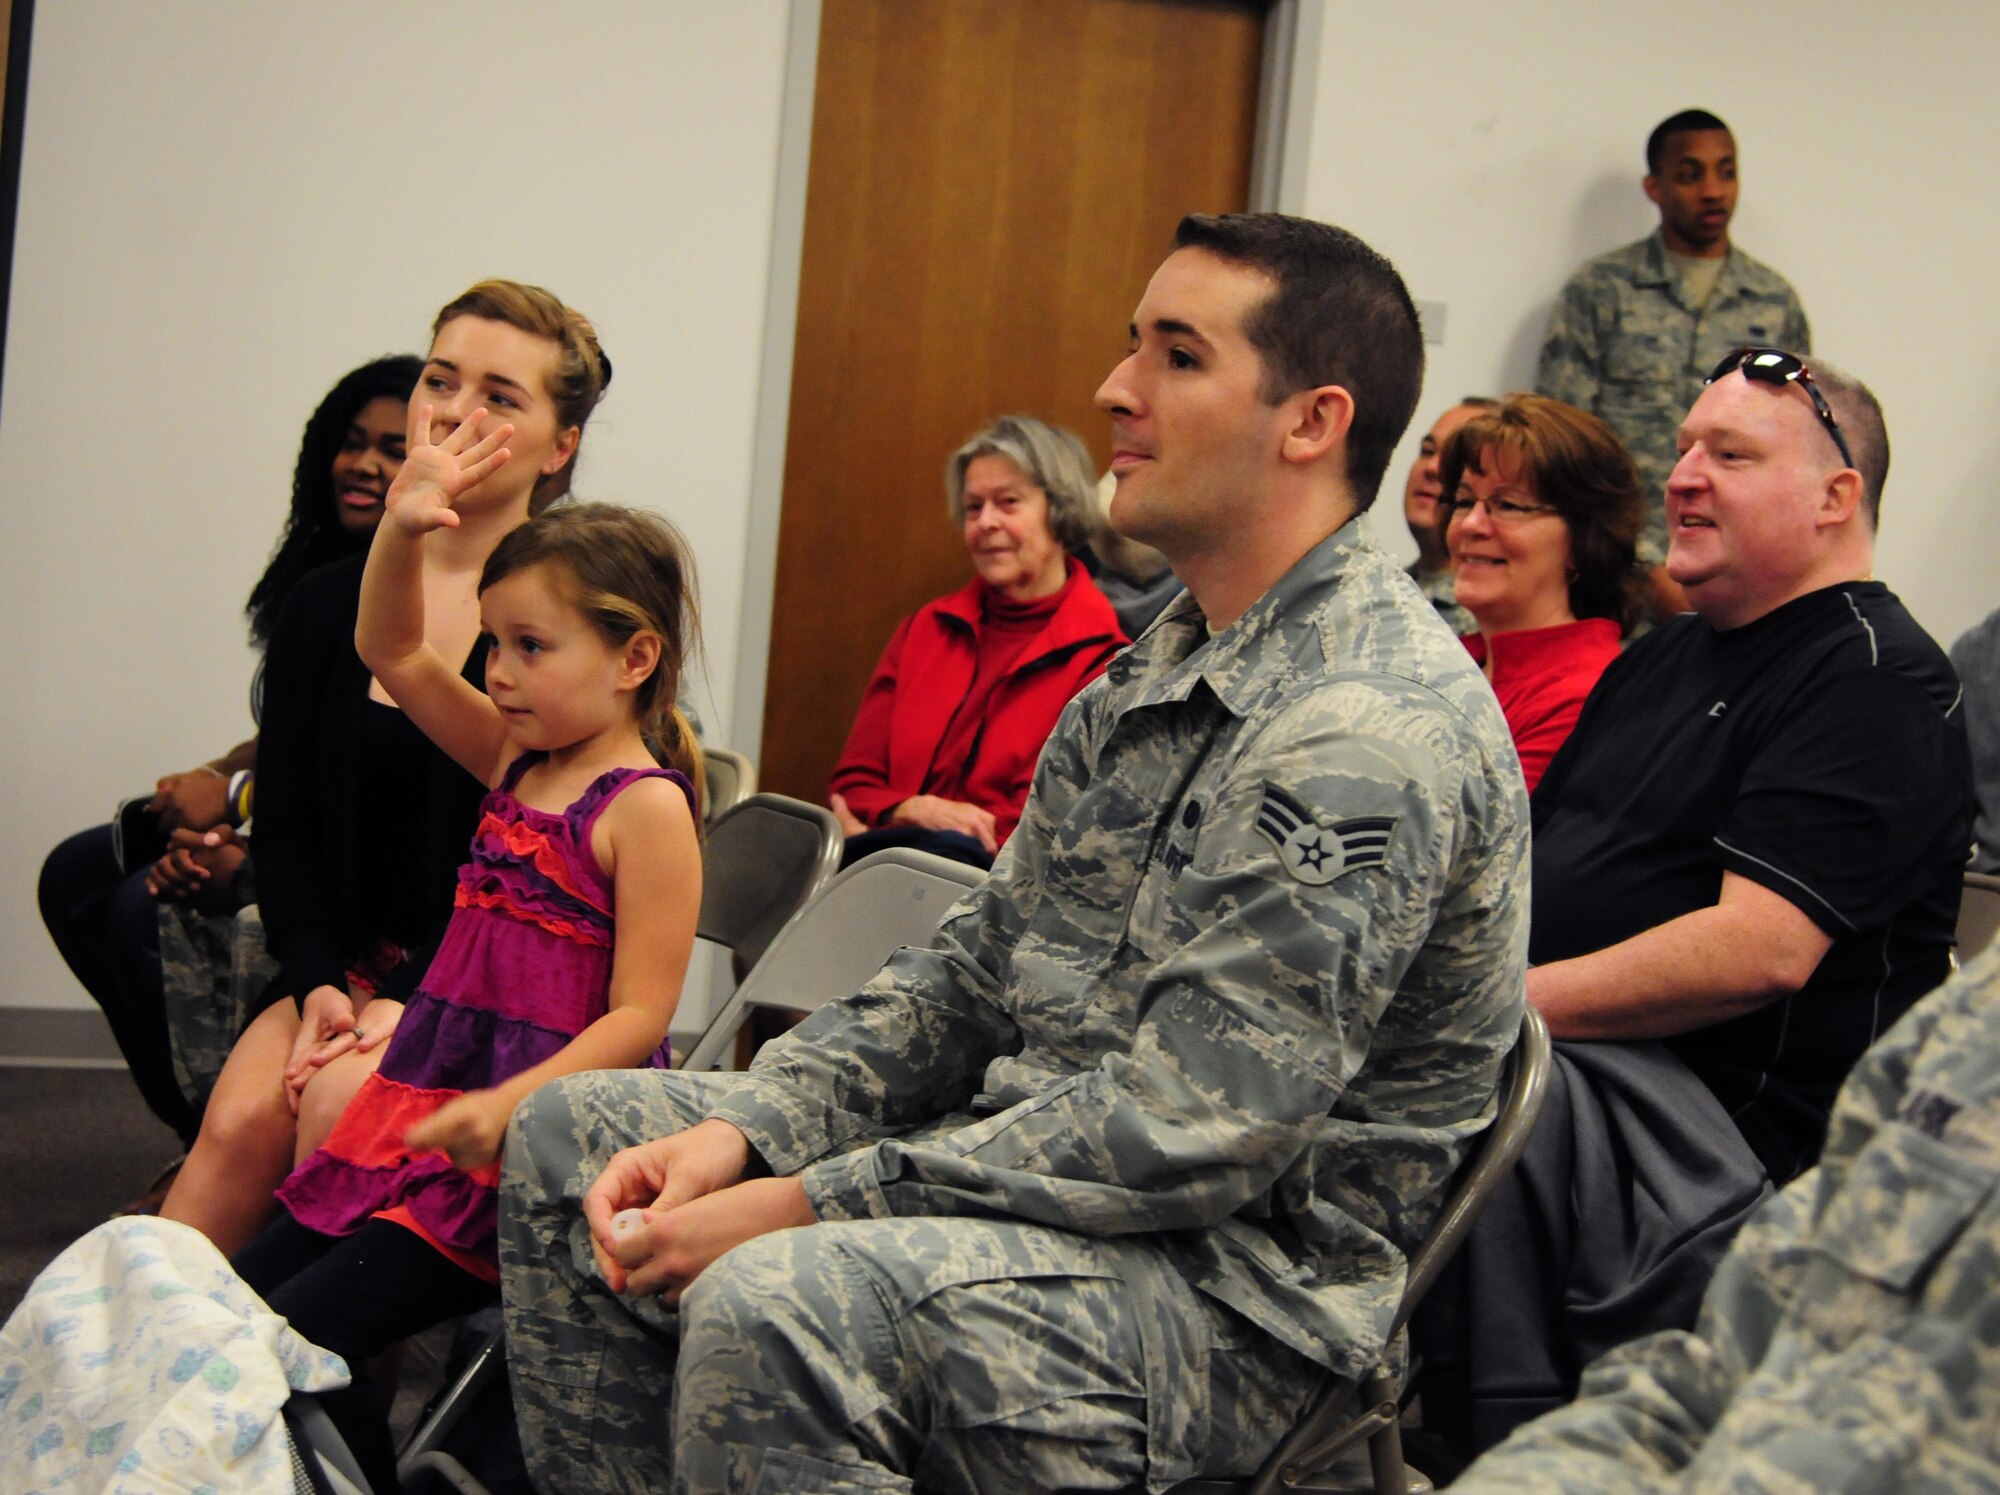 Aaliayah raises her hand to indicate that it’s her birthday during an open house hosted by the 548th Intelligence, Surveillance and Reconnaissance Group at Beale Air Force Base, April 13, 2016.  Members of the audience joined Col. Drew Taylor in singing “Happy Birthday” to Aaliayah and presented her with a cake. (U.S. Air Force photo by Staff Sgt. Zachary Vucic) 